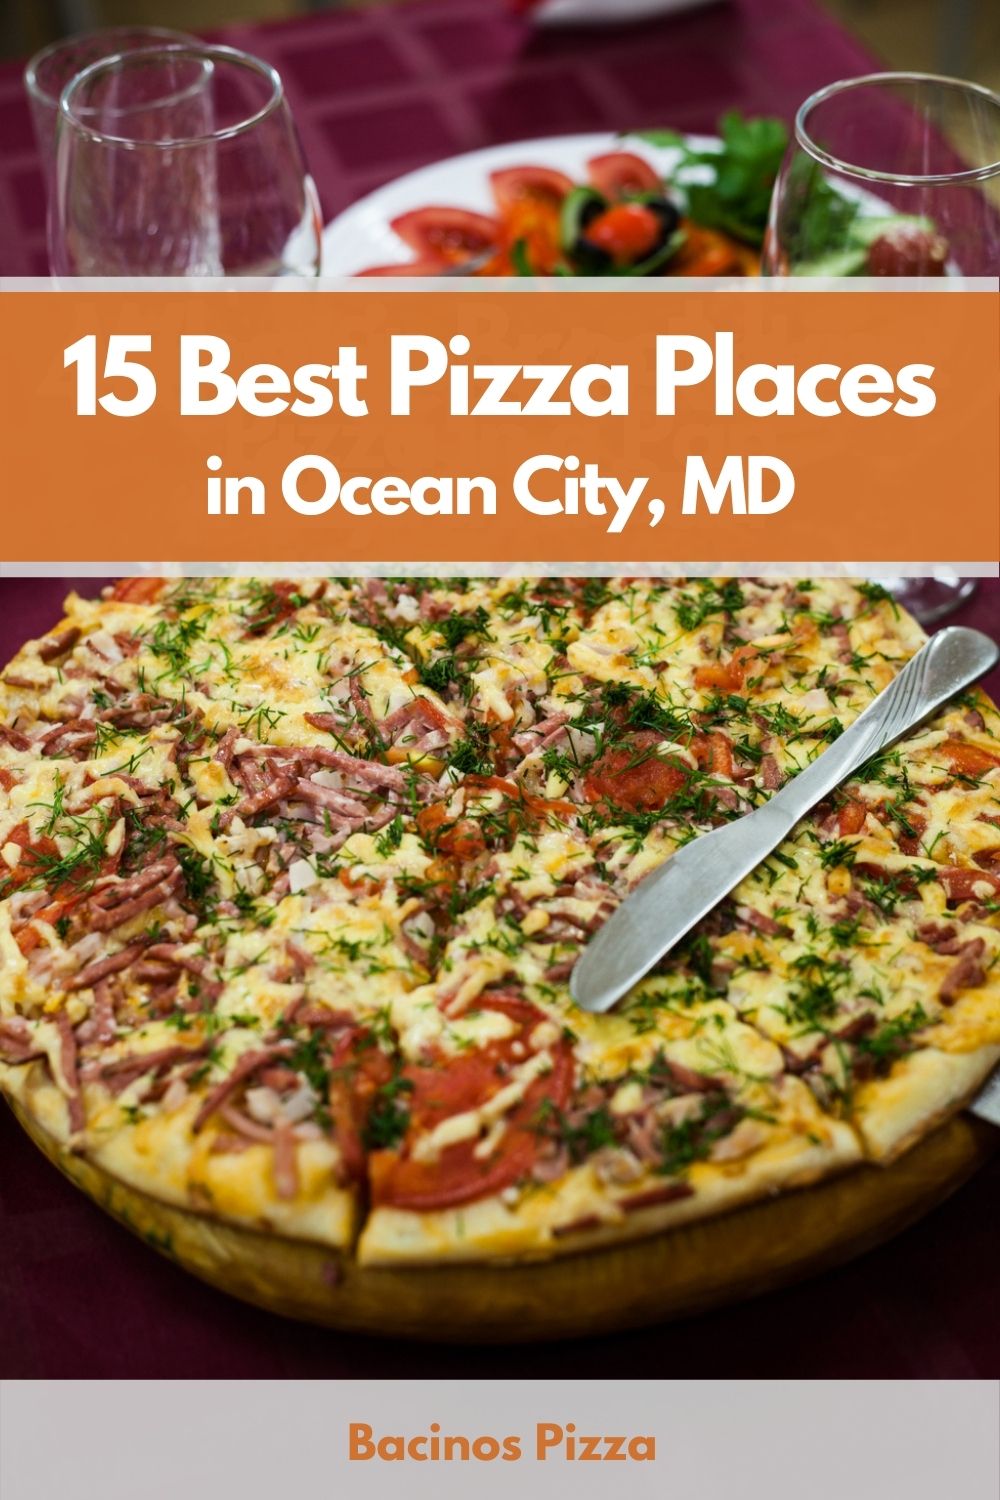 15 Best Pizza Places in Ocean City, MD pin 2